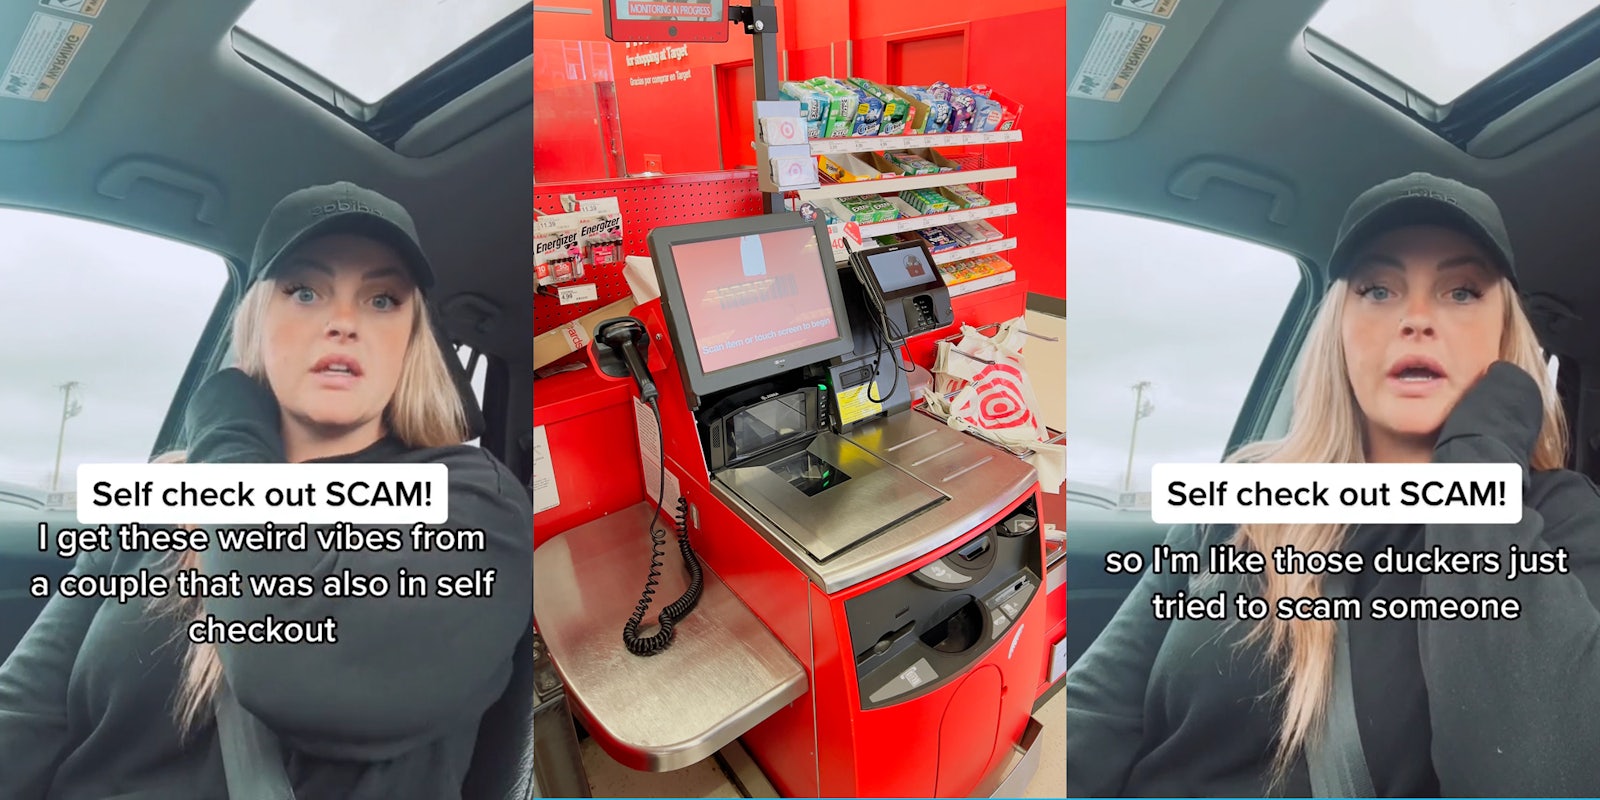 Target customer speaking in car with caption 'Self check out SCAM! I get these weird vibes from a couple that was also in self checkout' (l) Target self checkout (c) Target customer speaking in car with caption 'Self check out SCAM! so I'm like those duckers just tried to scam someone' (r)